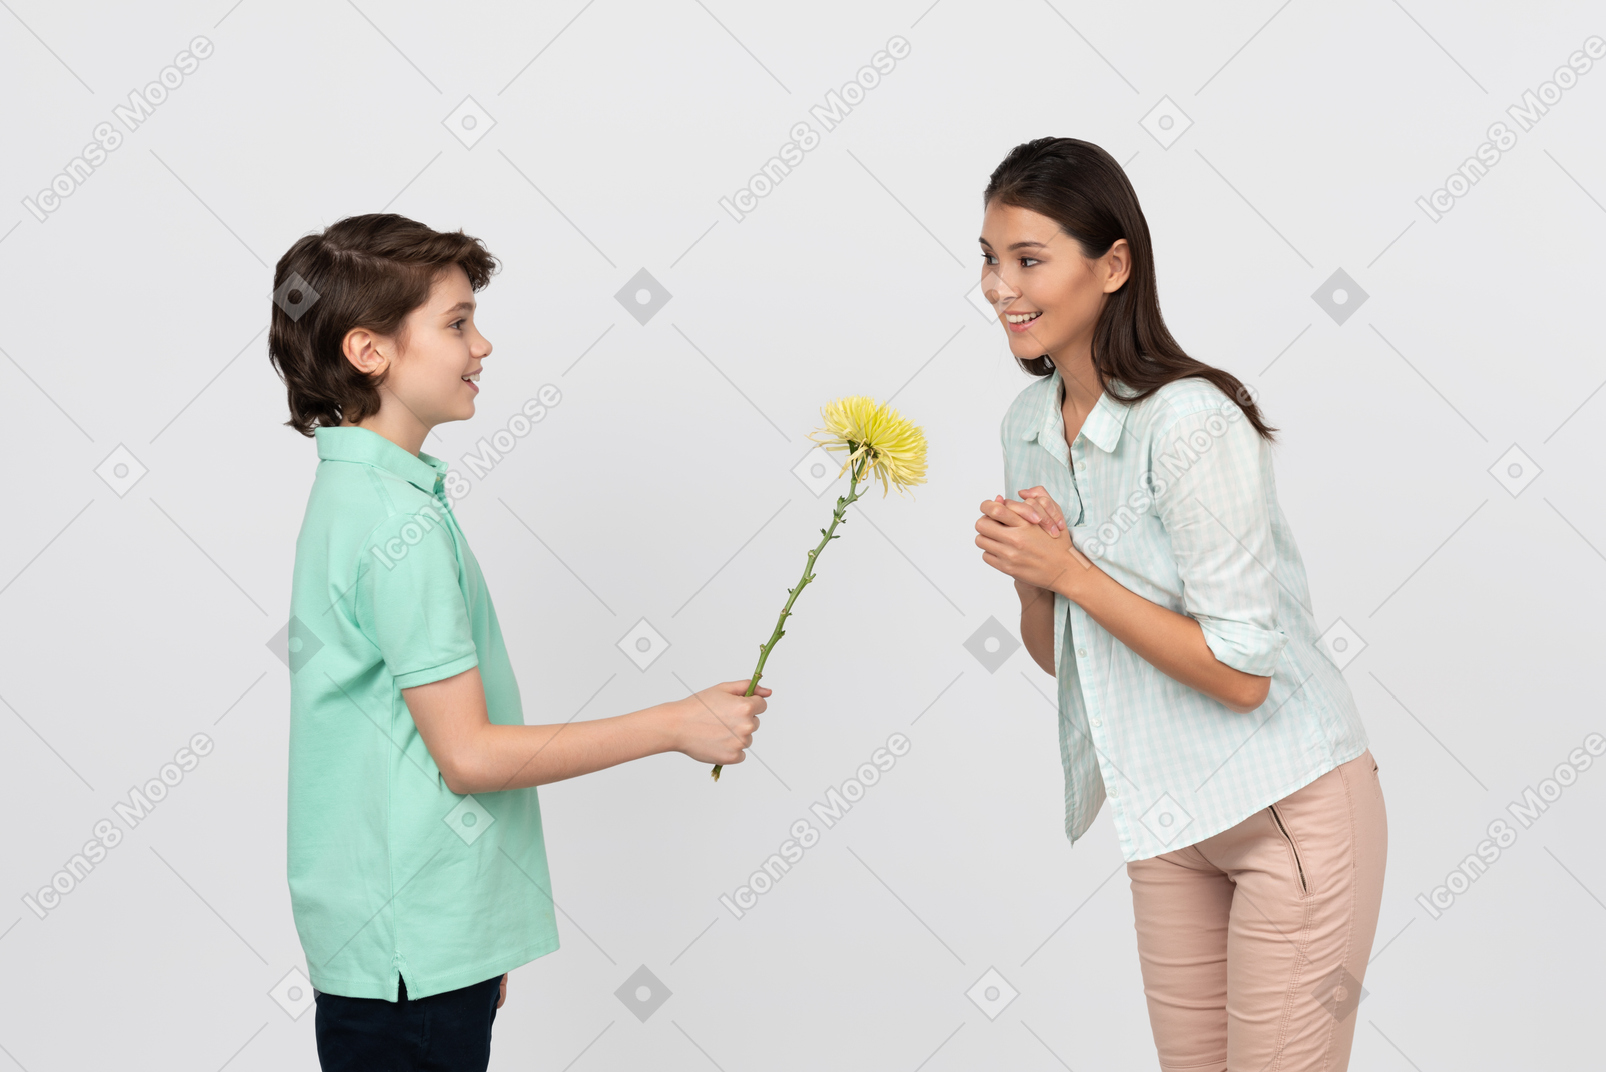 Attractive boy giving a flower to his mom